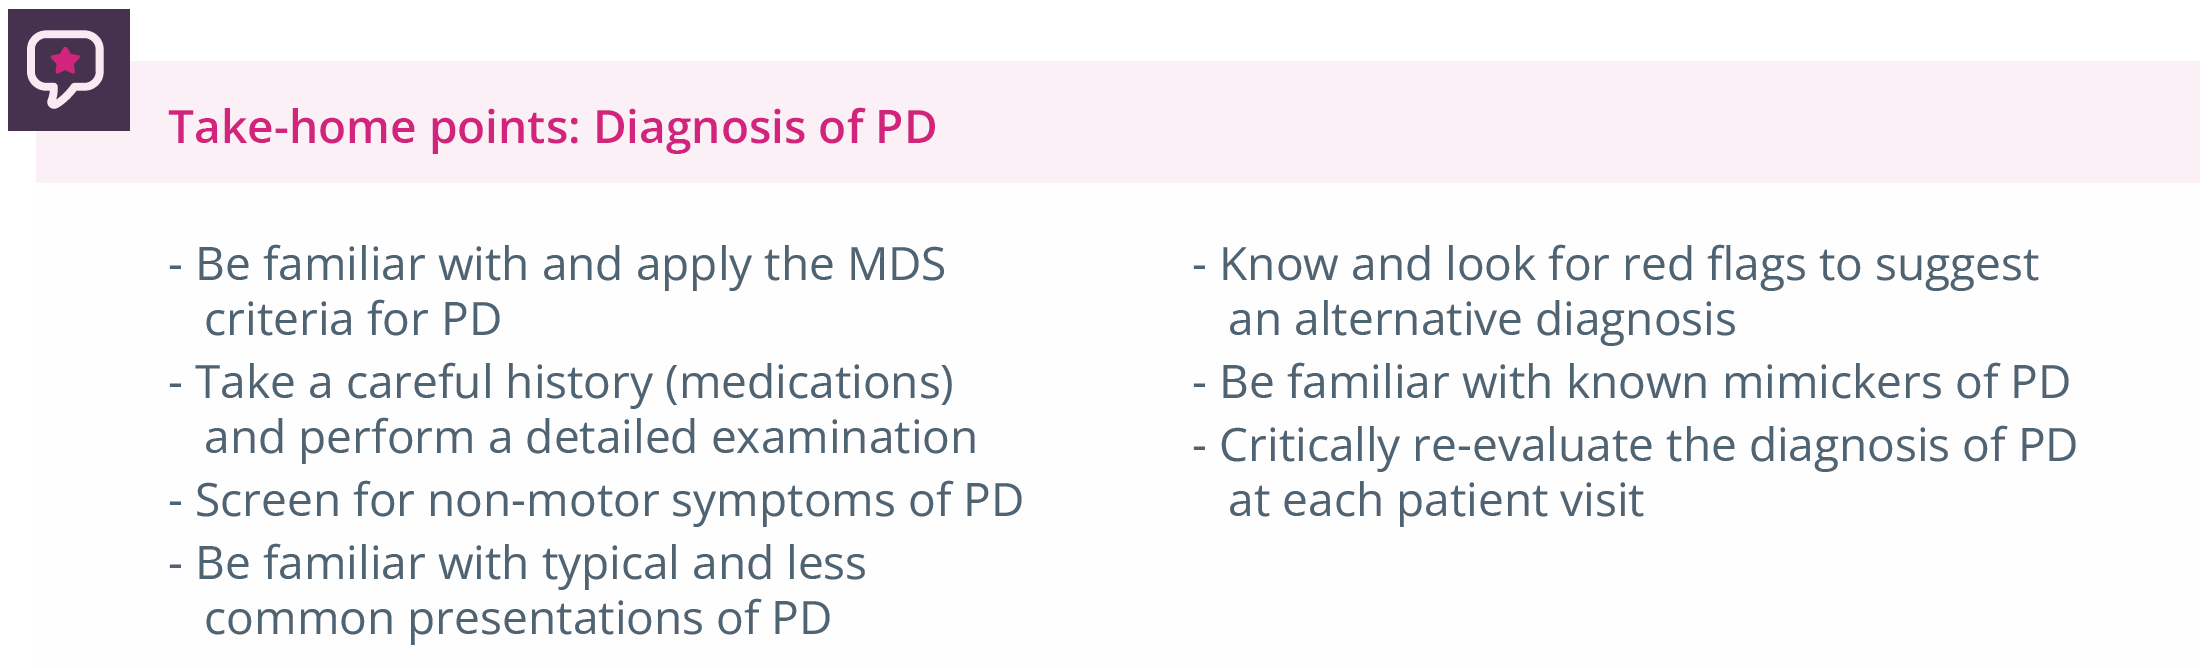 Summary of take-home points for PD diagnosis